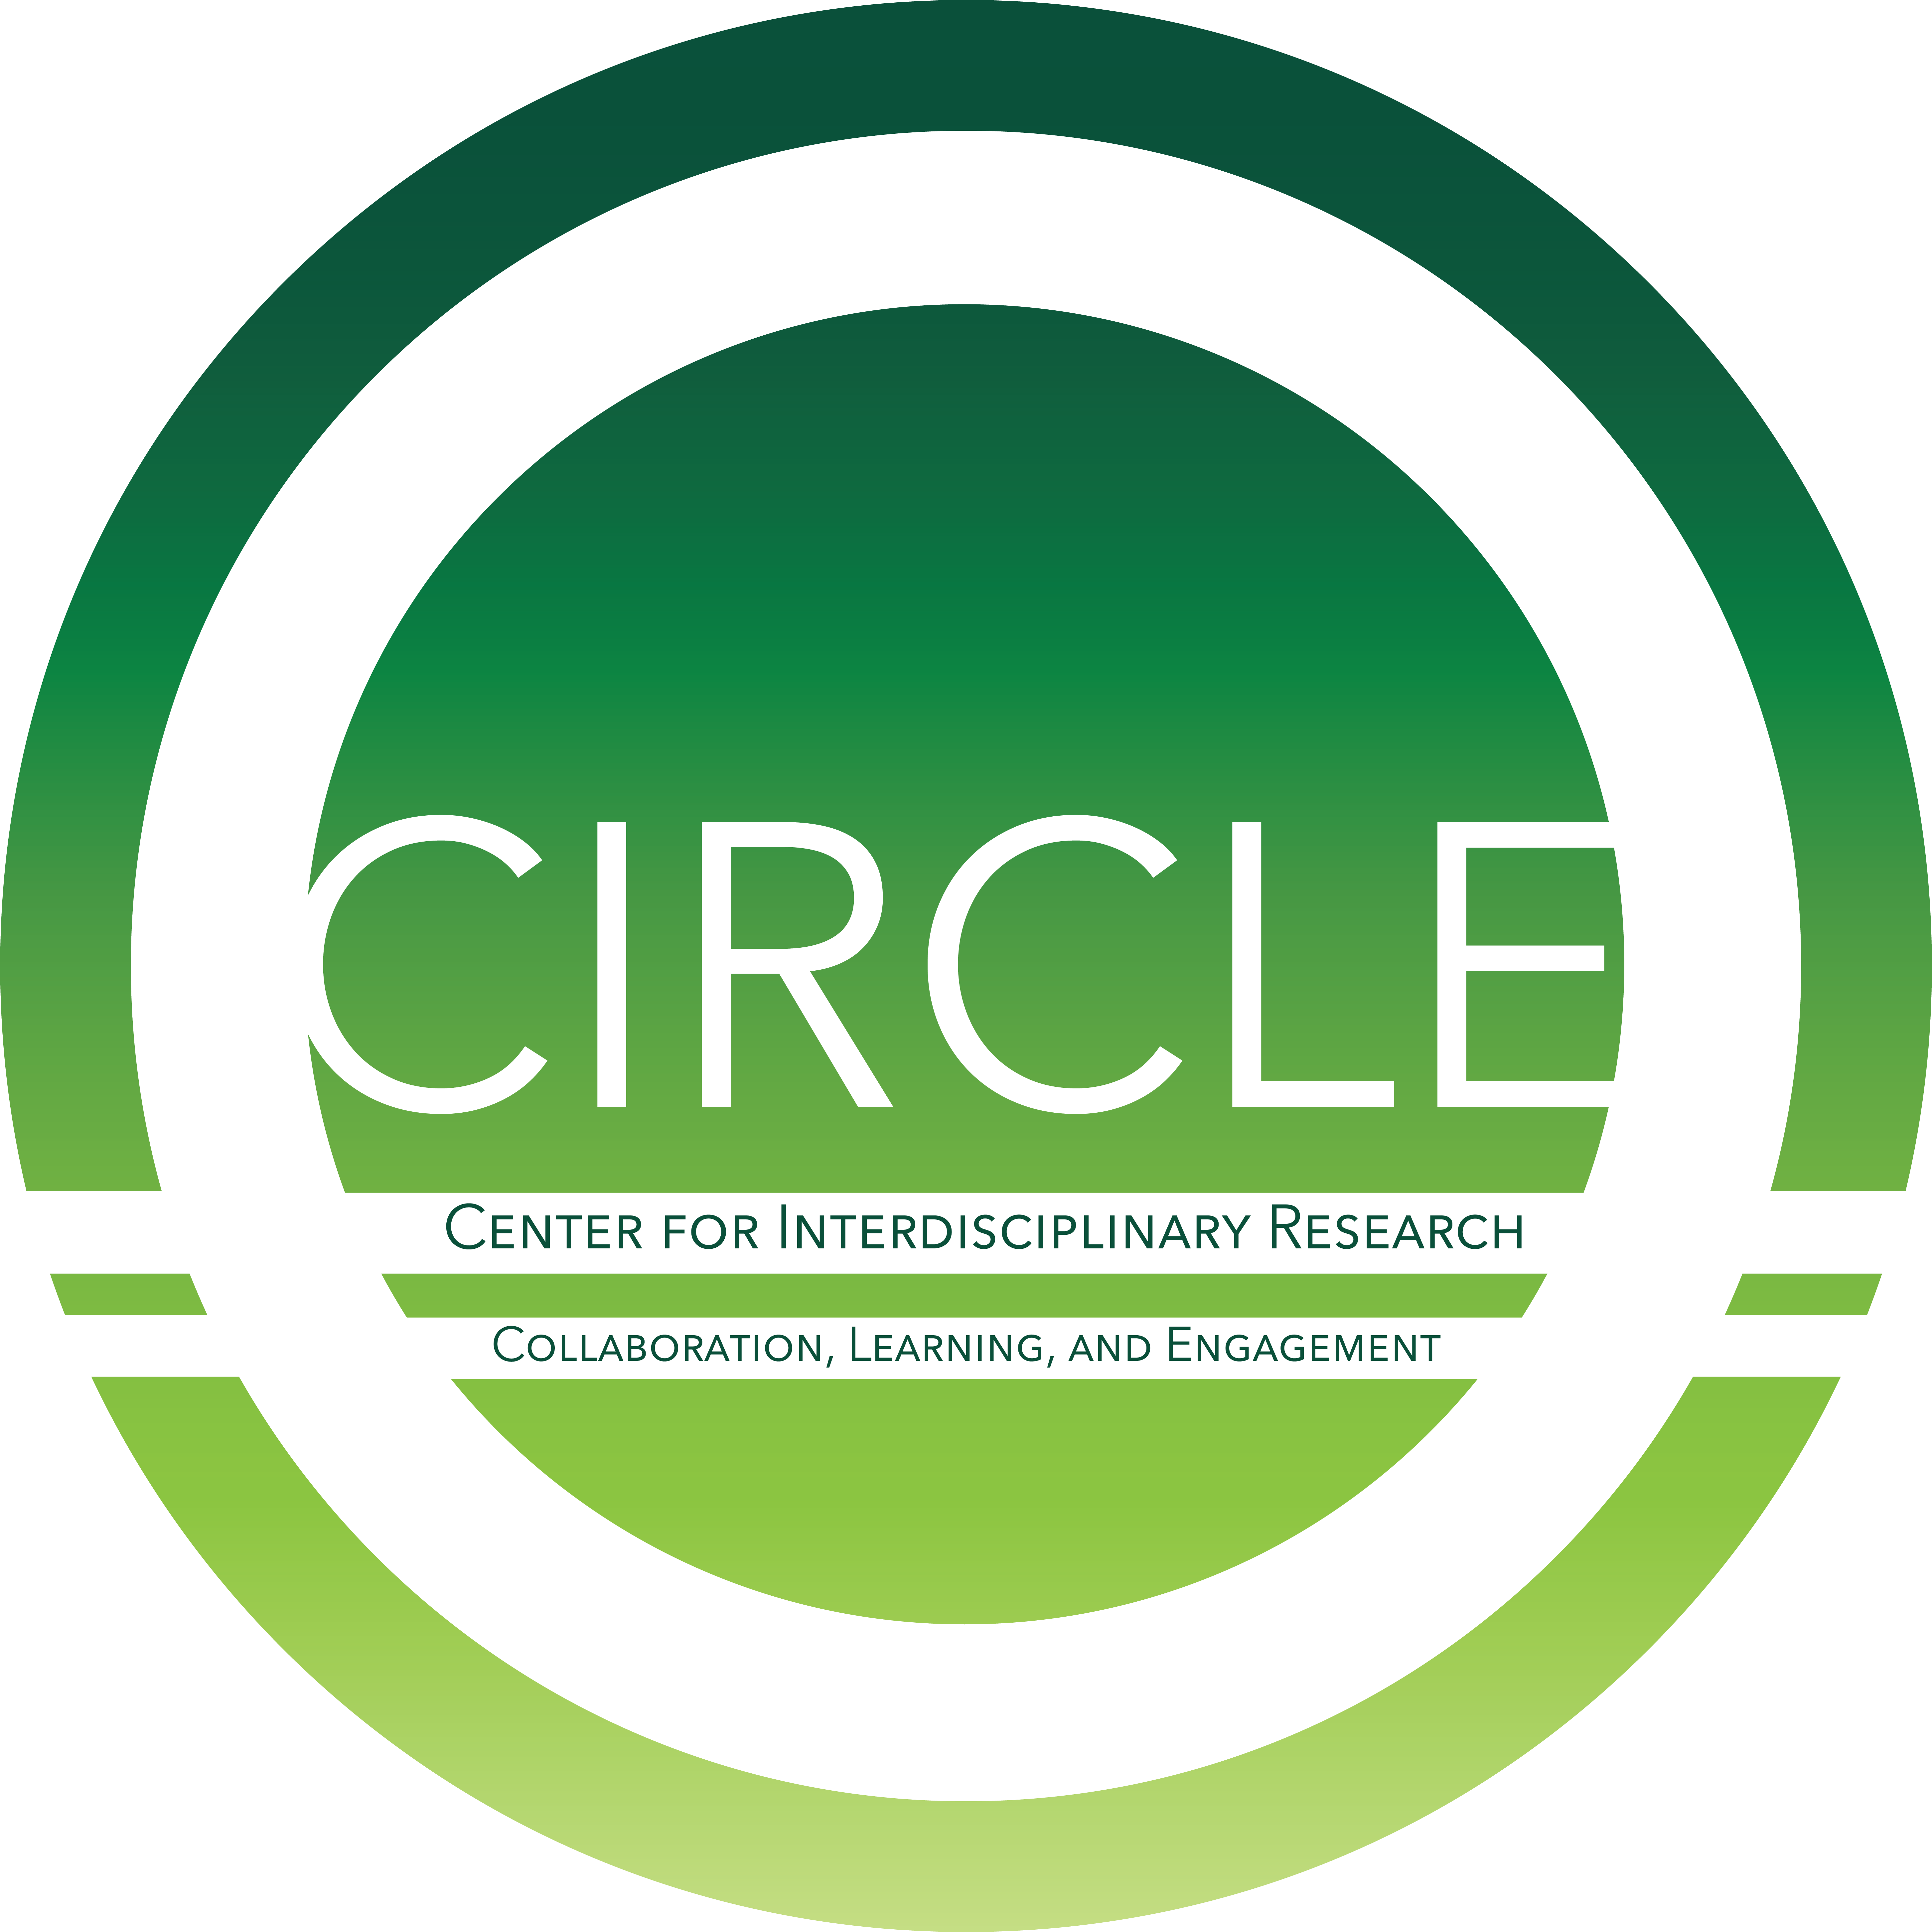 Center for Interdisciplinary Research, Collaboration, Learning, and Engagement (CIRCLE)